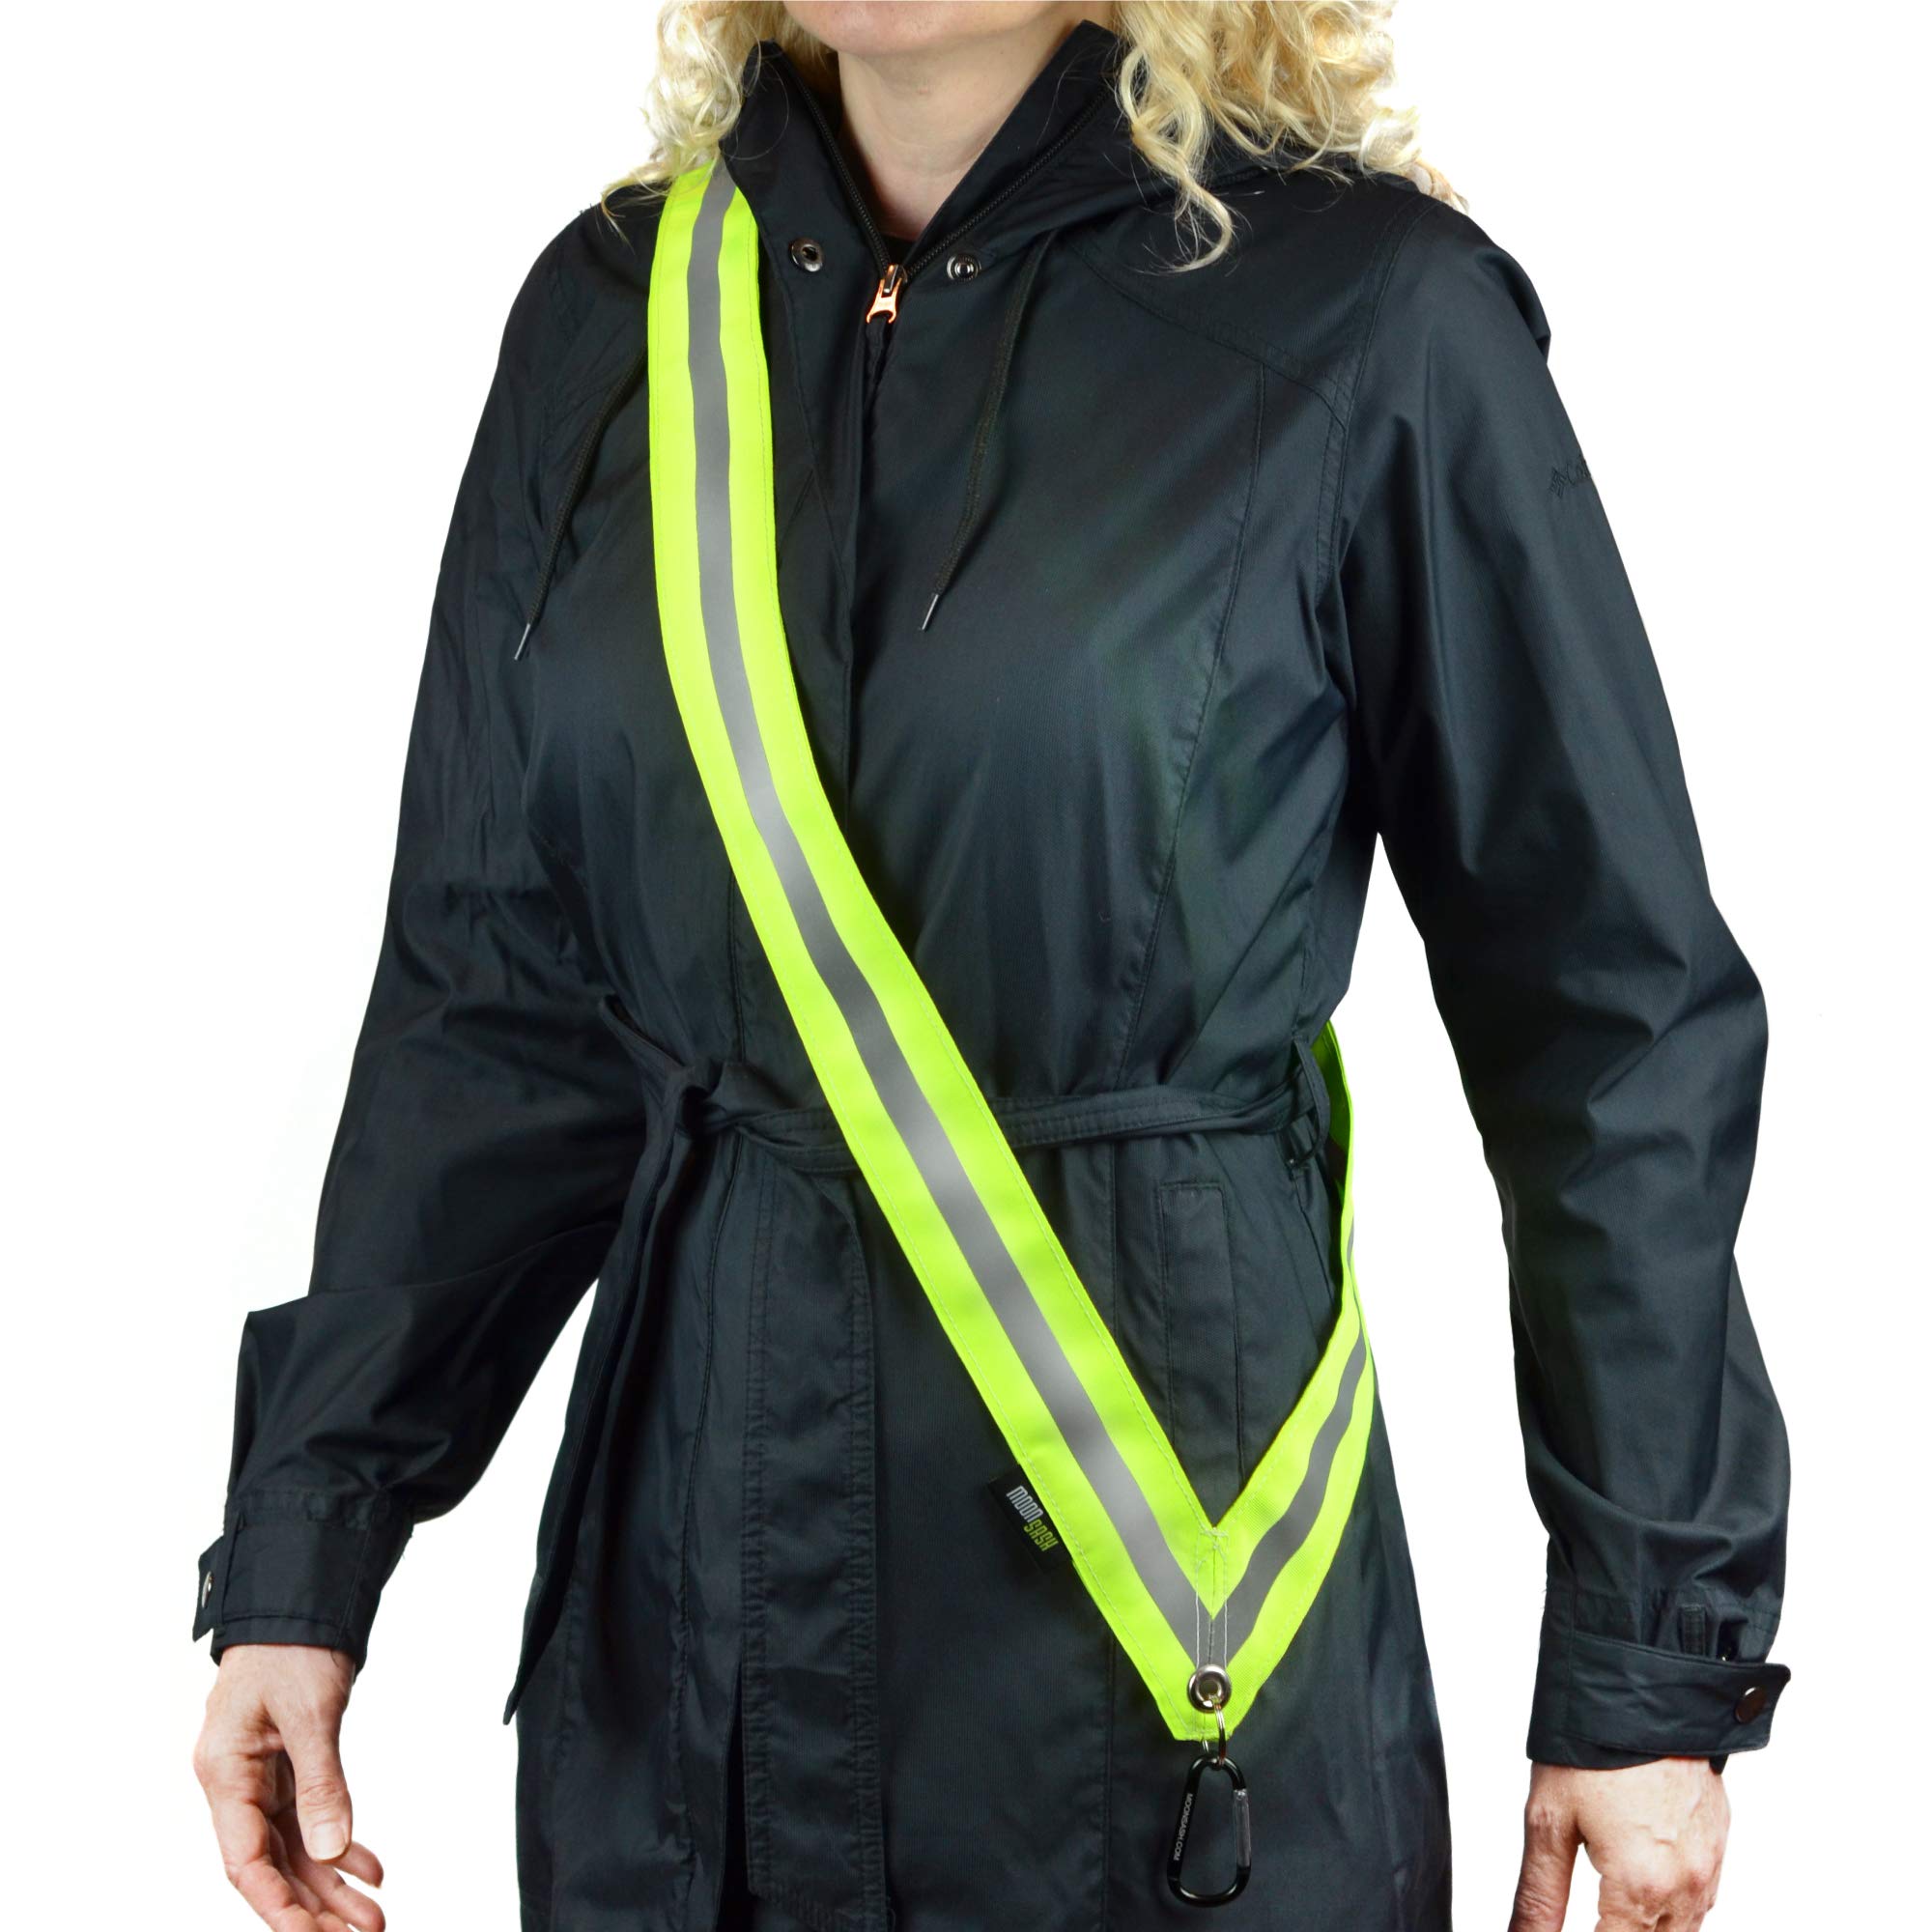 MOONSASH  Made in USA  Patented  The Original + Best Reflective Sash  No Batteries, Fitted Sizes, Reversible, Stylish & Durable Reflective Gear for Walking at Night